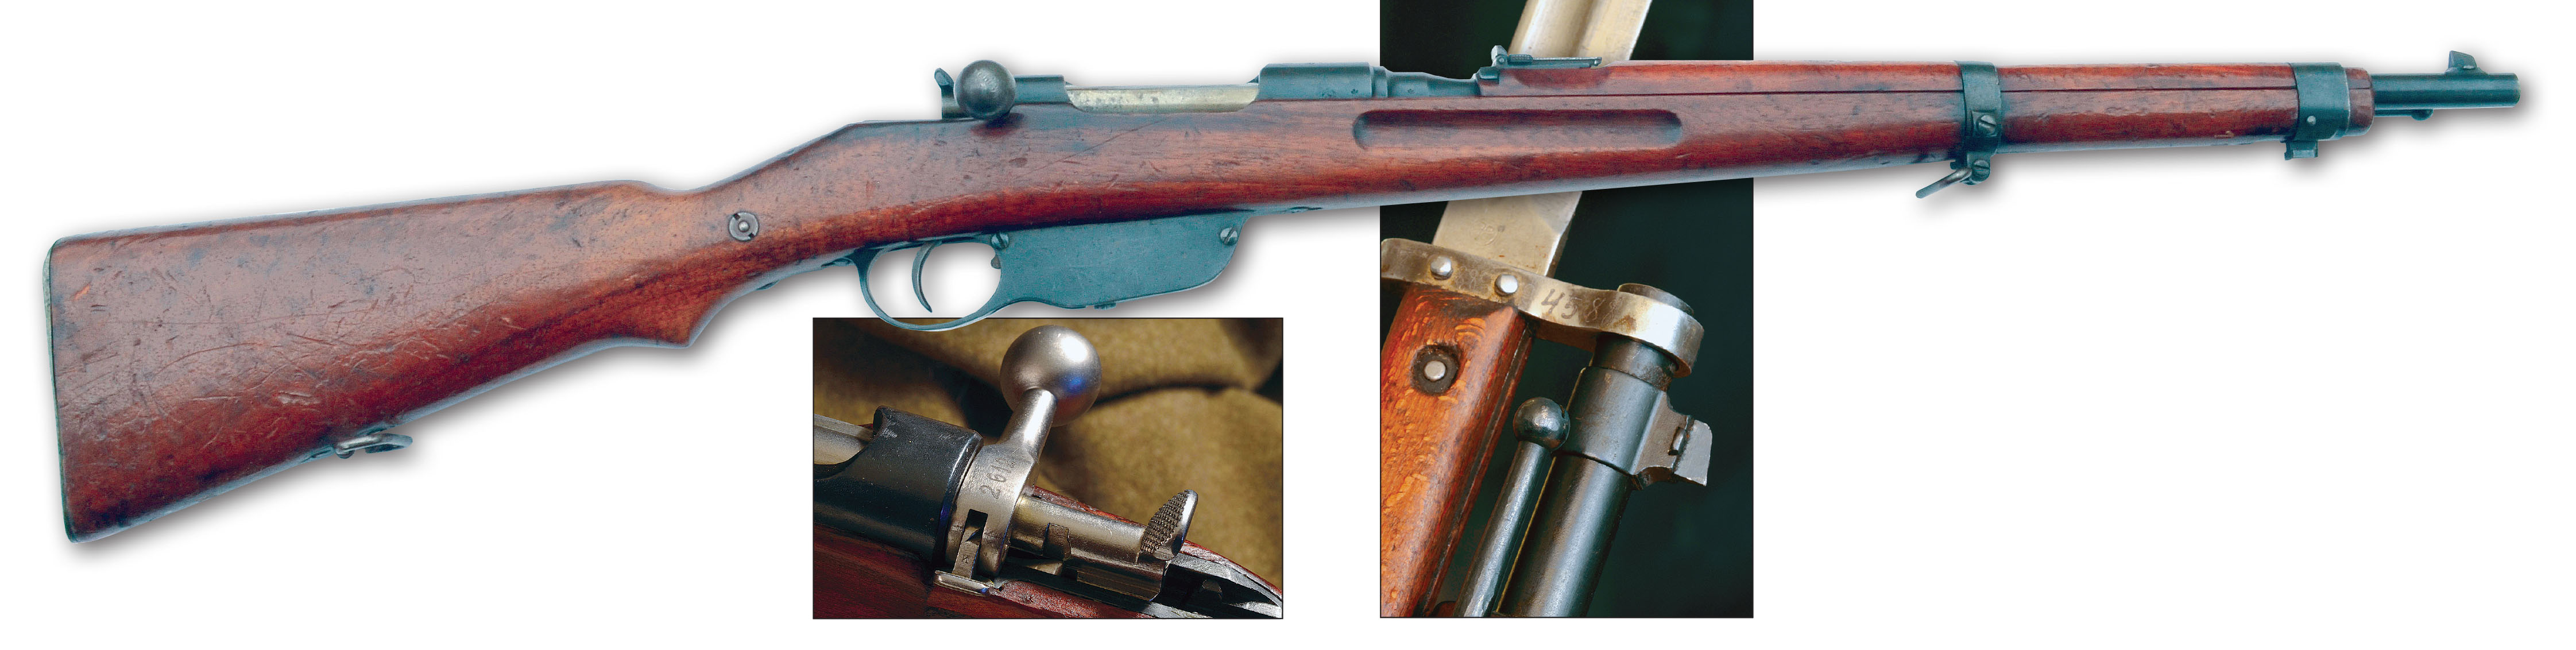 The Mannlicher M95 action’s cocking piece could be manipulated with the thumb, and the safety was simple and out of the way. It was the first rifle to use stainless steel (the bolt), and its barrel was thinner and lighter, because it was made of a special steel alloy developed by Steyr. The Mannlicher M95 Stutzen had both a bayonet lug and stacking rod that were omitted from the otherwise similar M95 cavalry carbine.